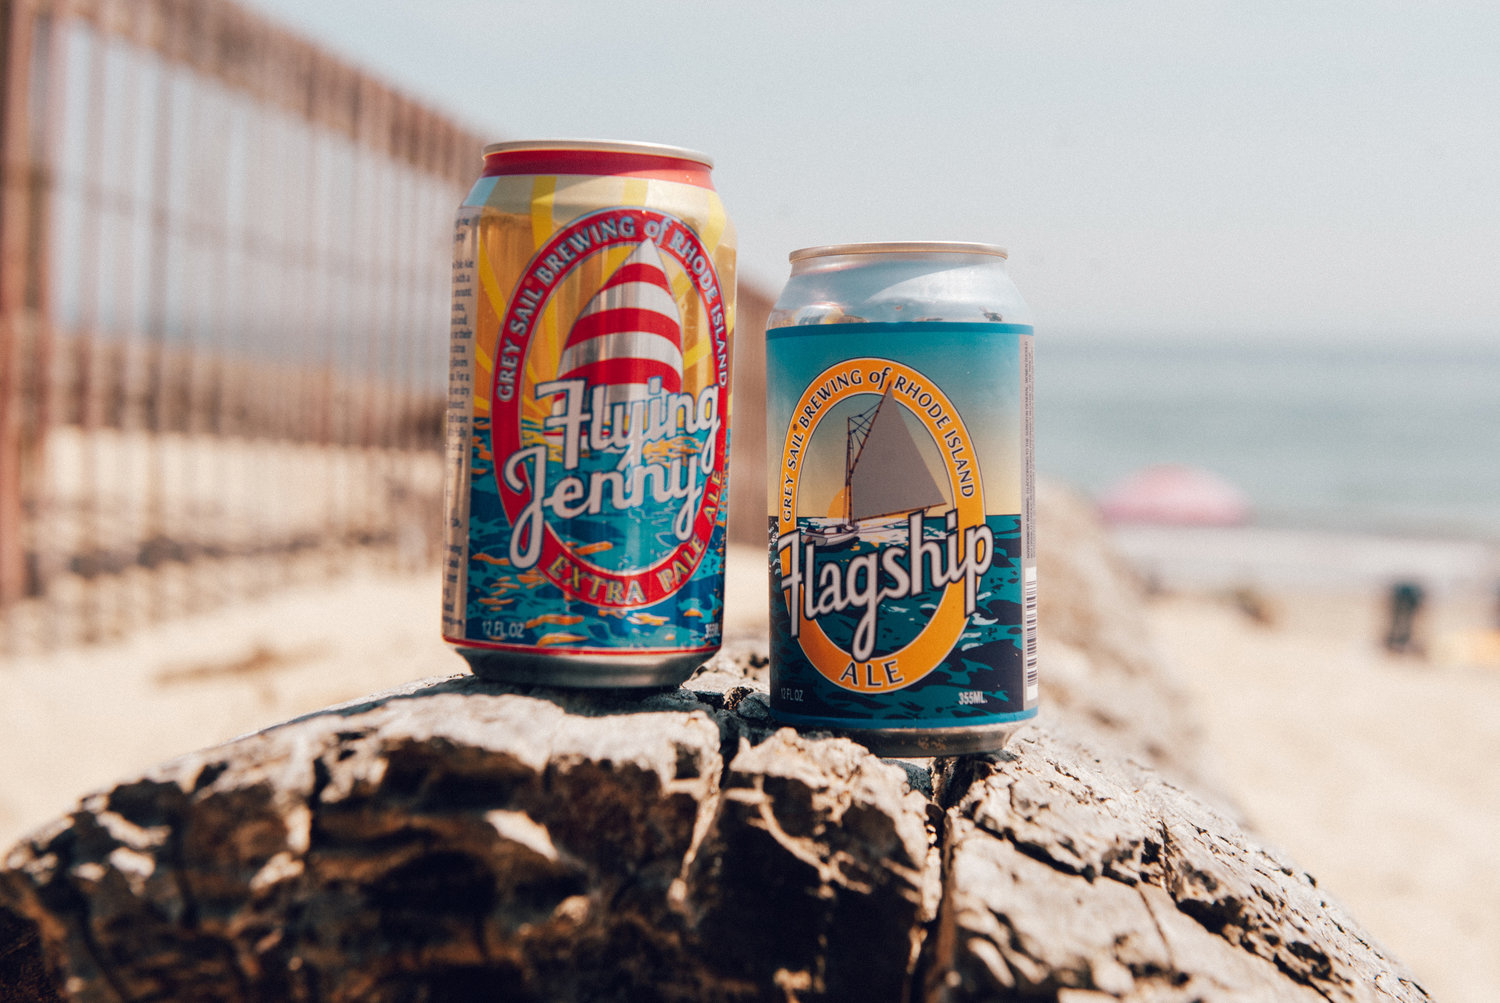 Grey Sail is known for its colorful cans and craft brews sporting fun, coastal names